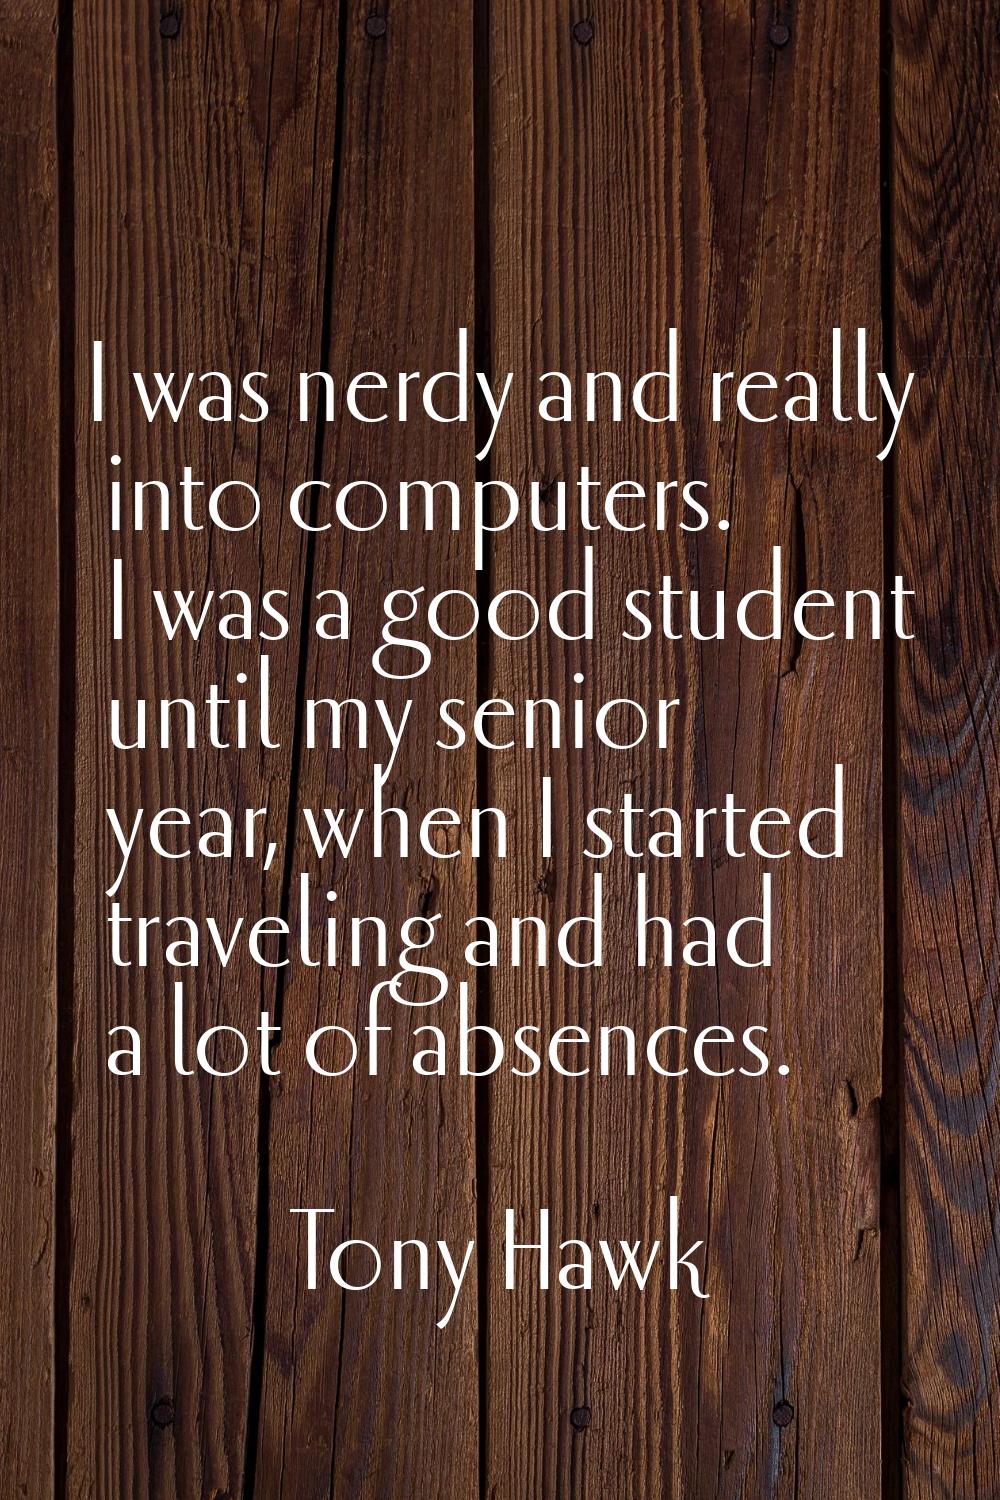 I was nerdy and really into computers. I was a good student until my senior year, when I started tr